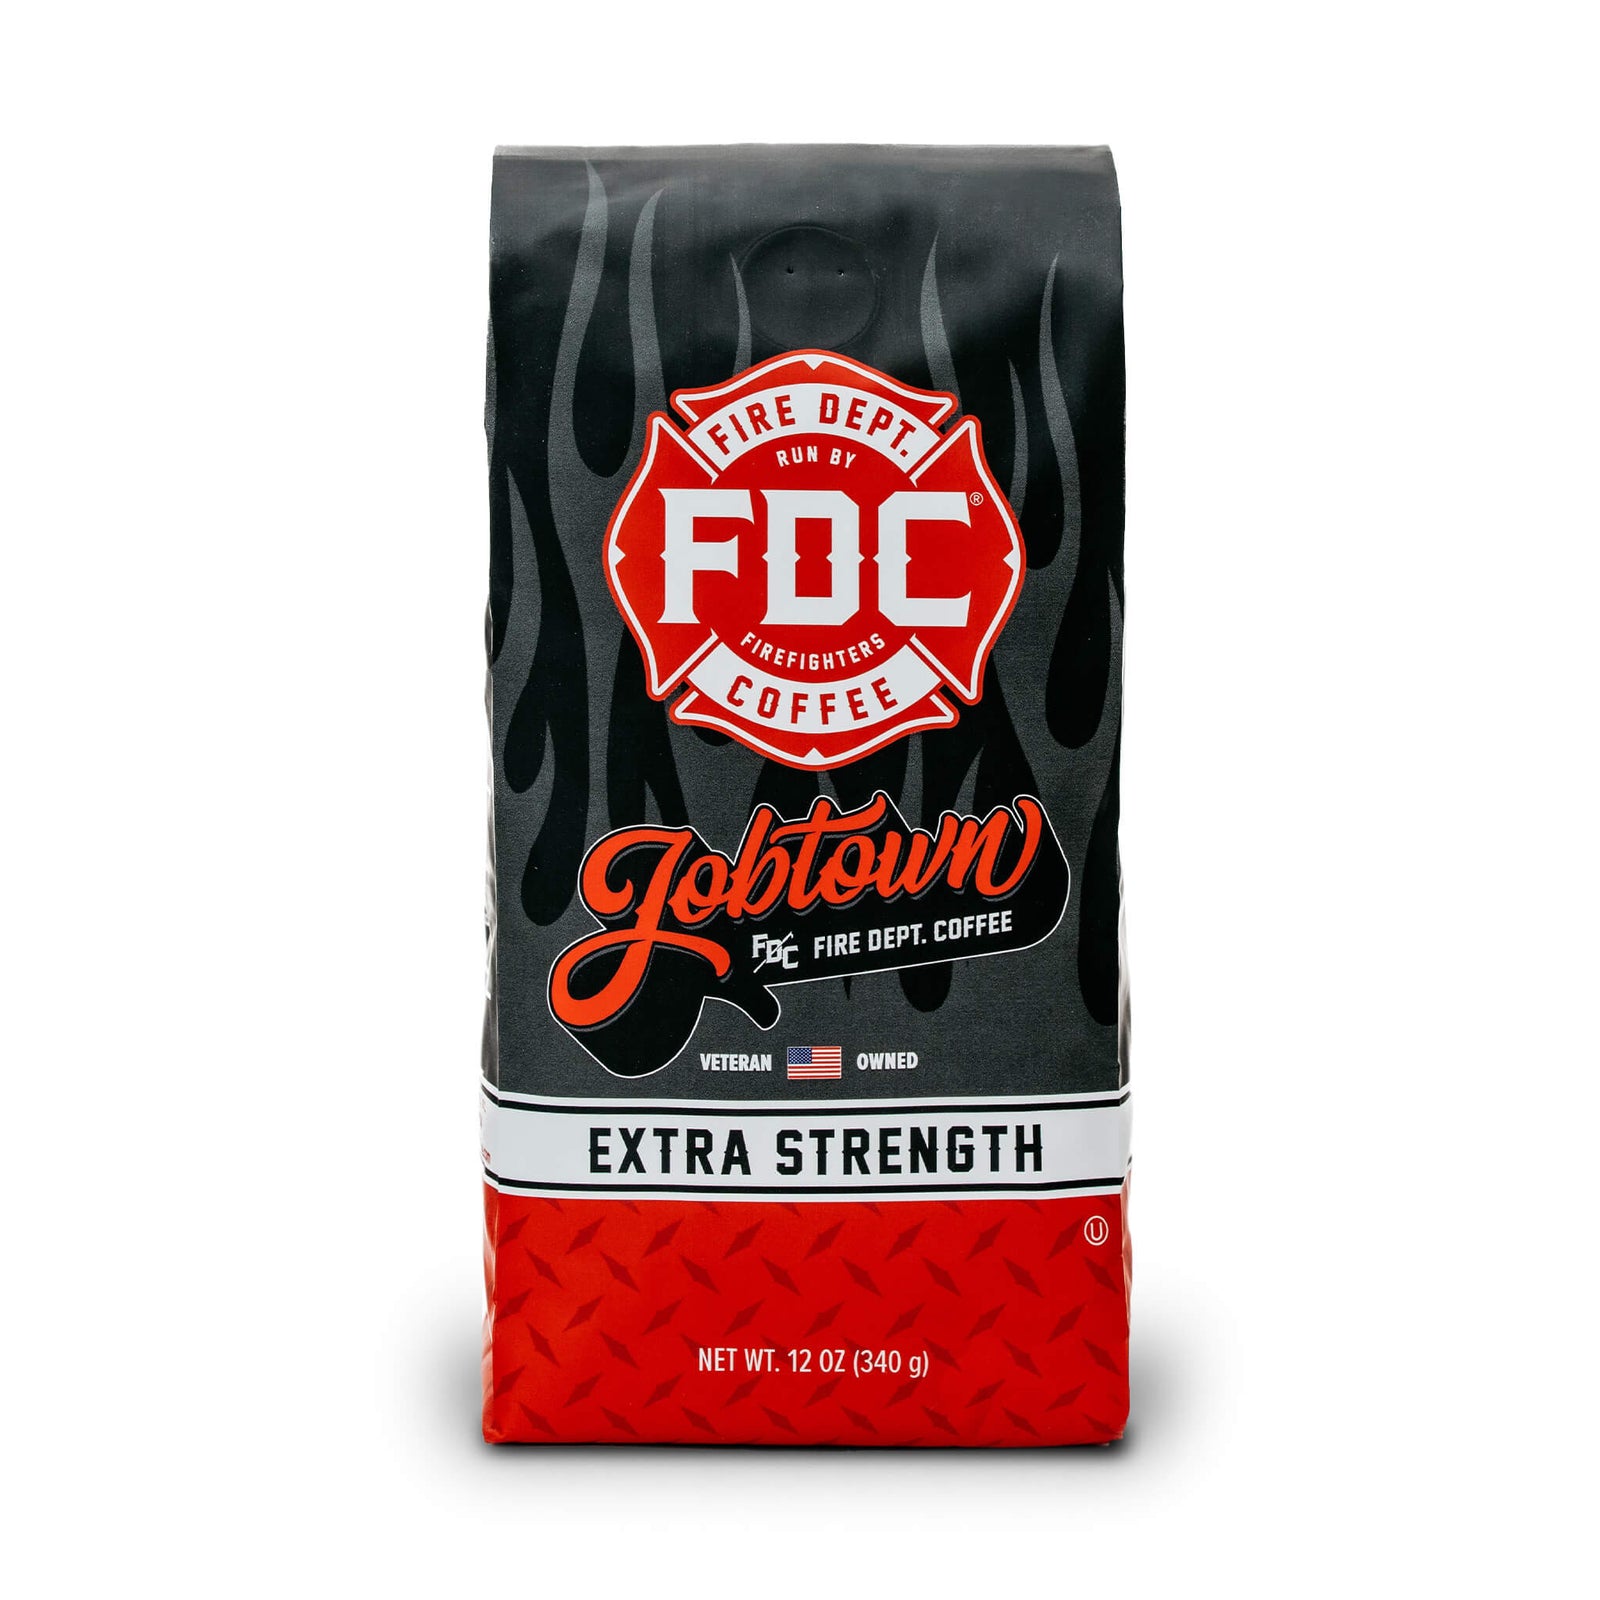 A 12 oz bag of Fire Department Coffee's Jobtown Extra Strength Coffee